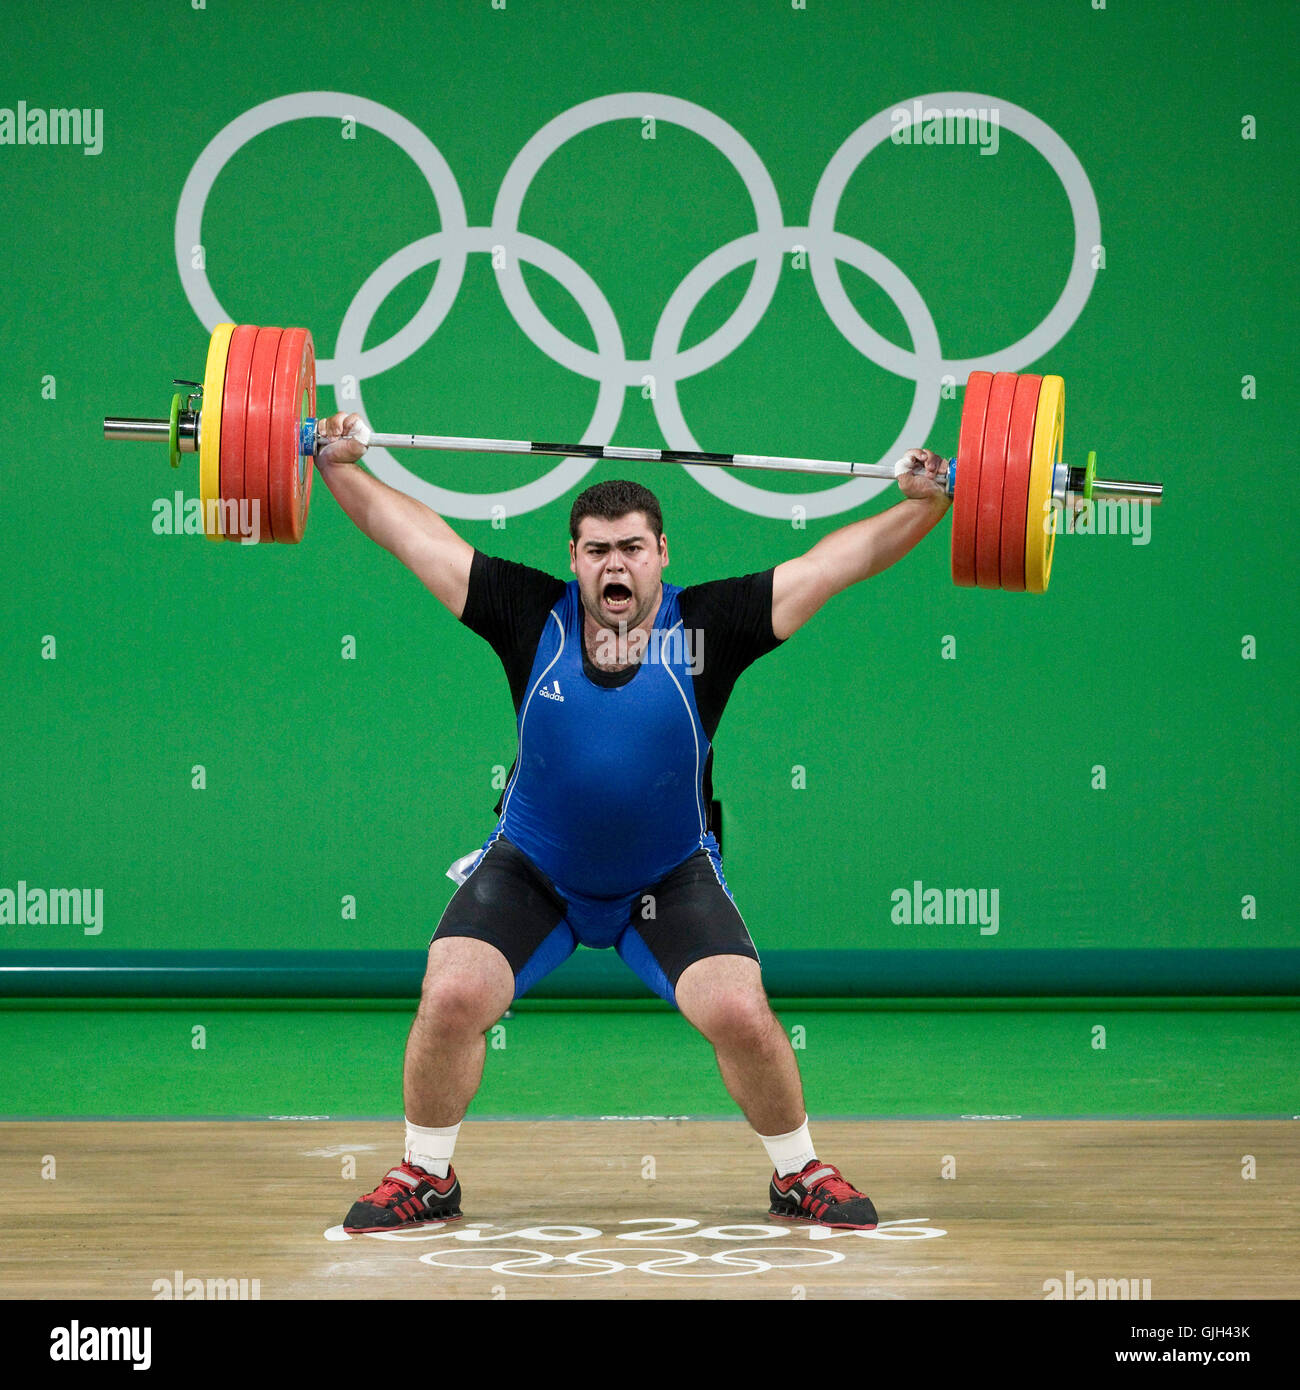 Rio de Janeiro, Brazil. 16th Aug, 2016. Silver medal winner GOR MINASYAN of Armenia earns silver in action during the Men's  105kg weightlifting final at the Rio 2016 Summer Olympic Games. Credit:  Paul Kitagaki Jr./ZUMA Wire/Alamy Live News Stock Photo